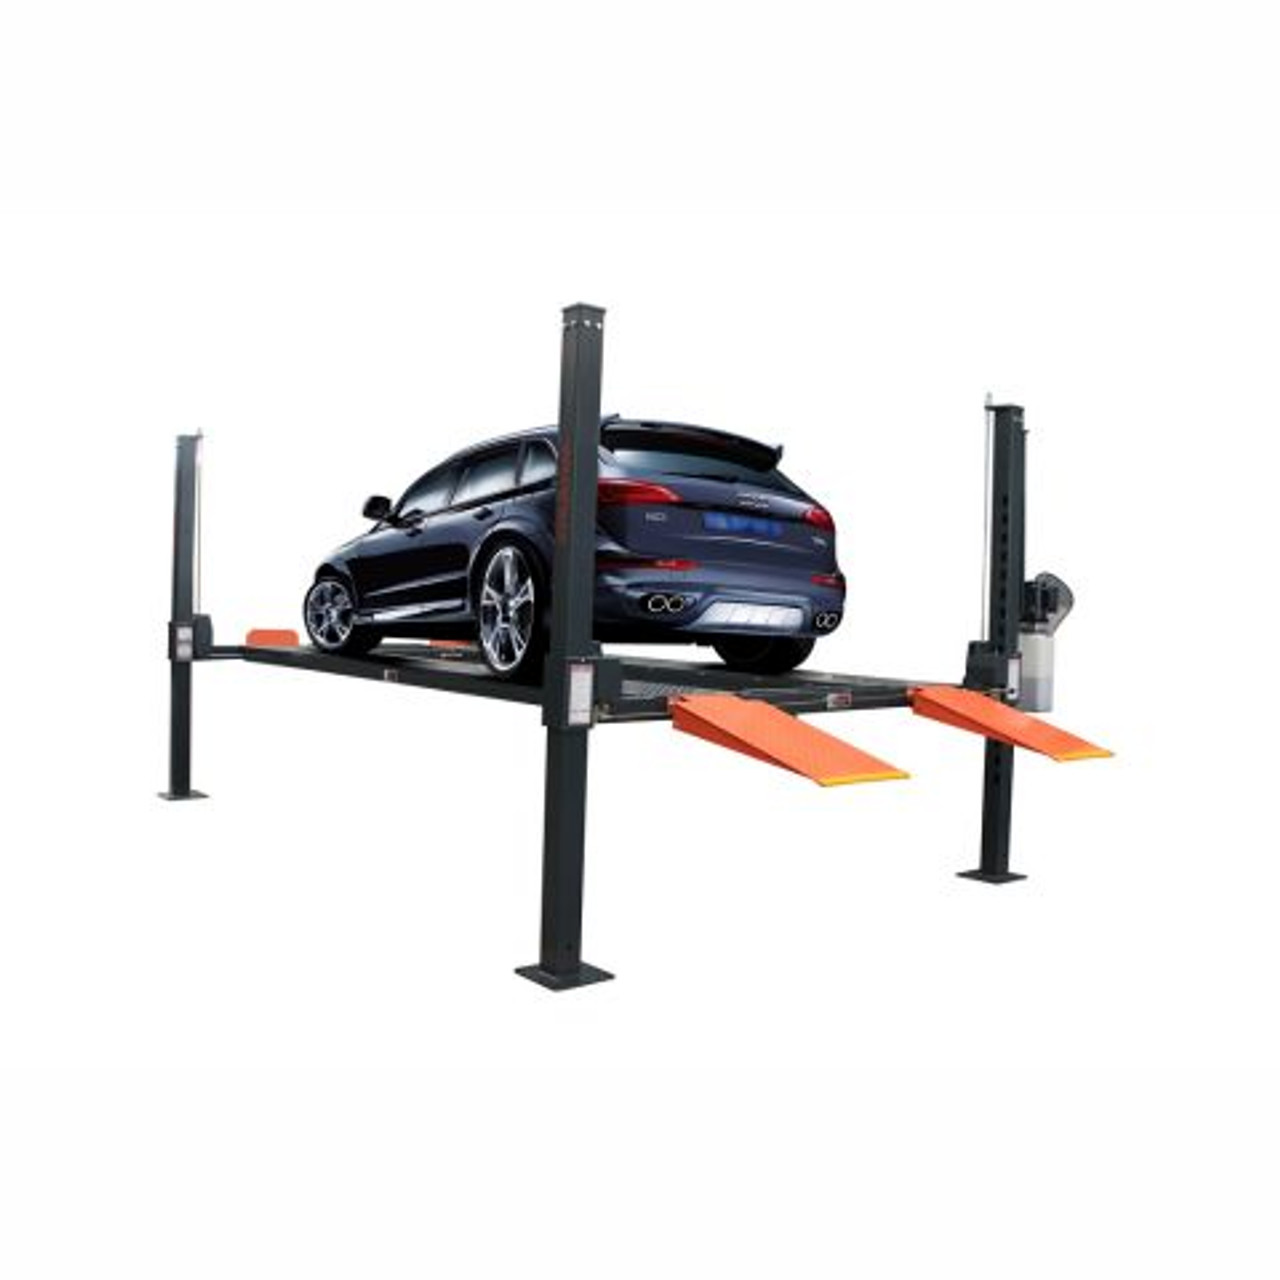 Upgrade your garage with the space-saving and versatile Stratus Auto Equipment Compact 4 Post Car Lift for Garages! Engineered with a remarkable 9,000 lbs capacity, this car lift is capable of handling a wide range of vehicles, from small sedans to larger SUVs.